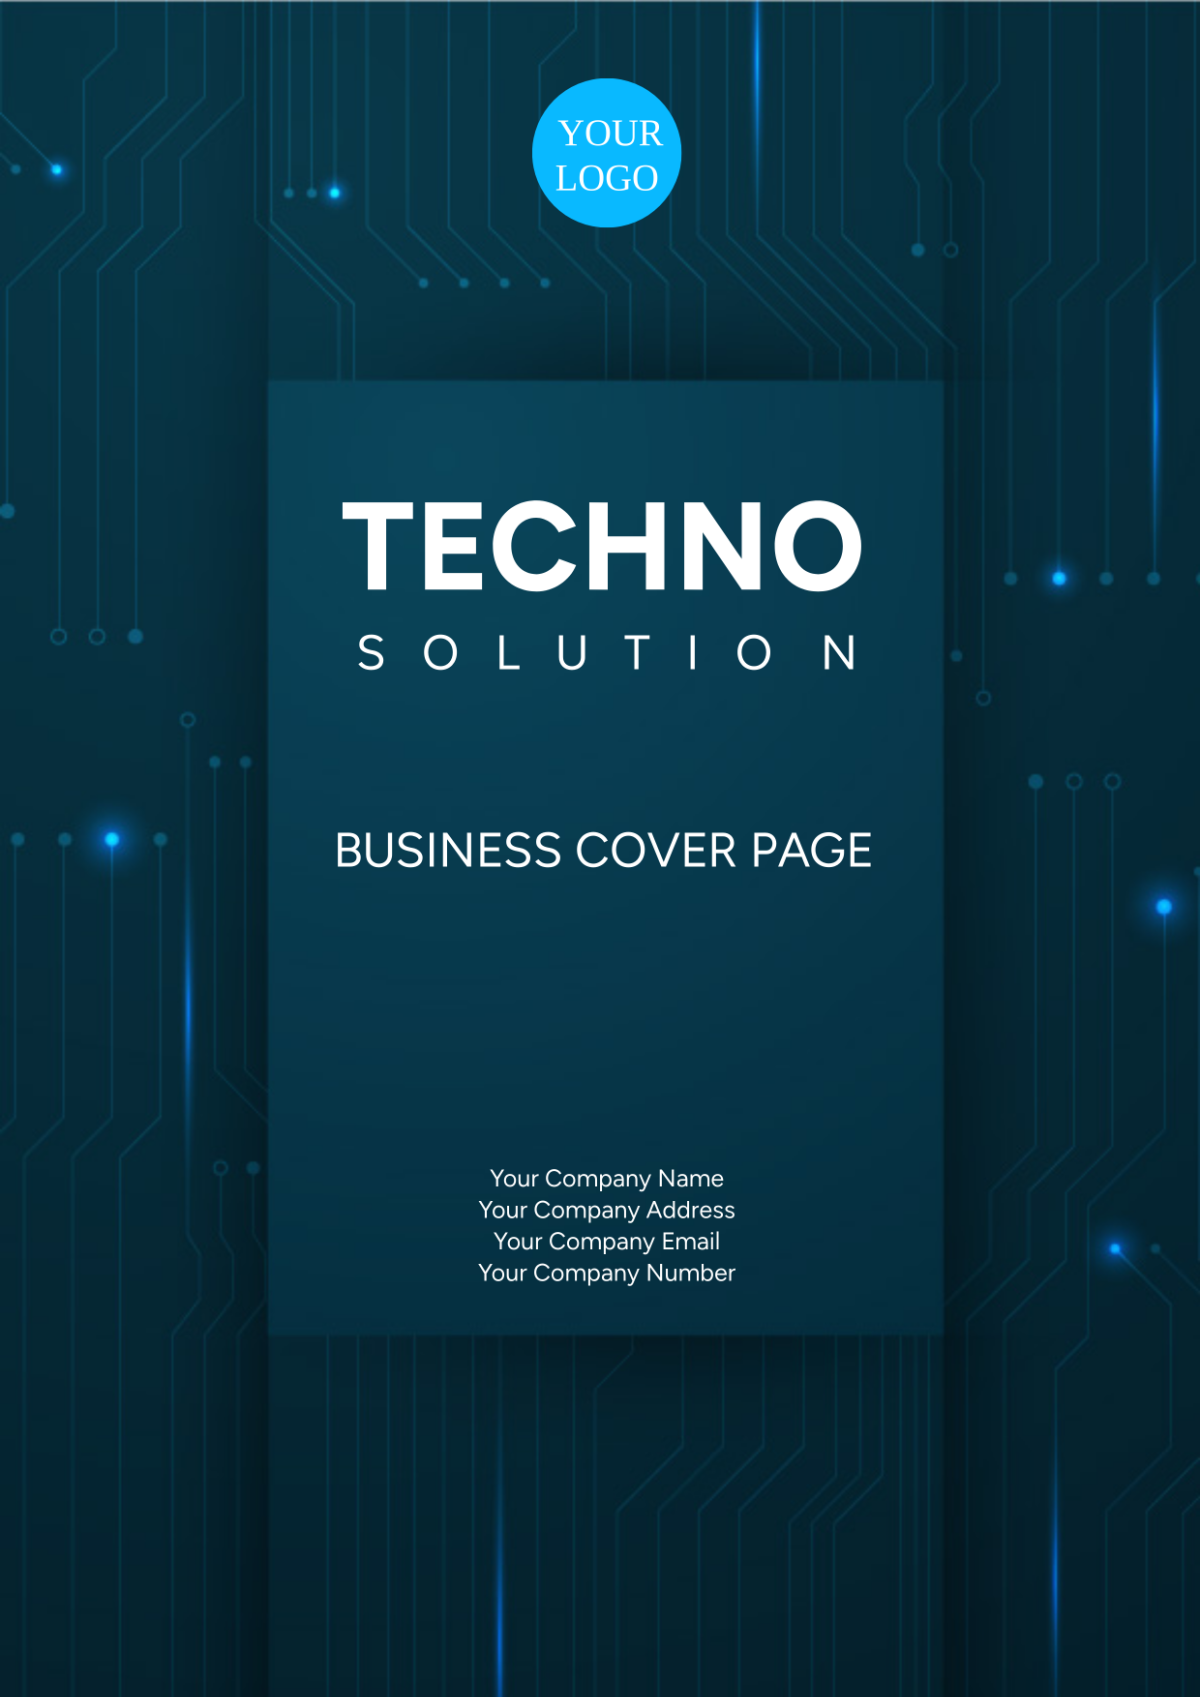 Tech Solutions Business Cover Page